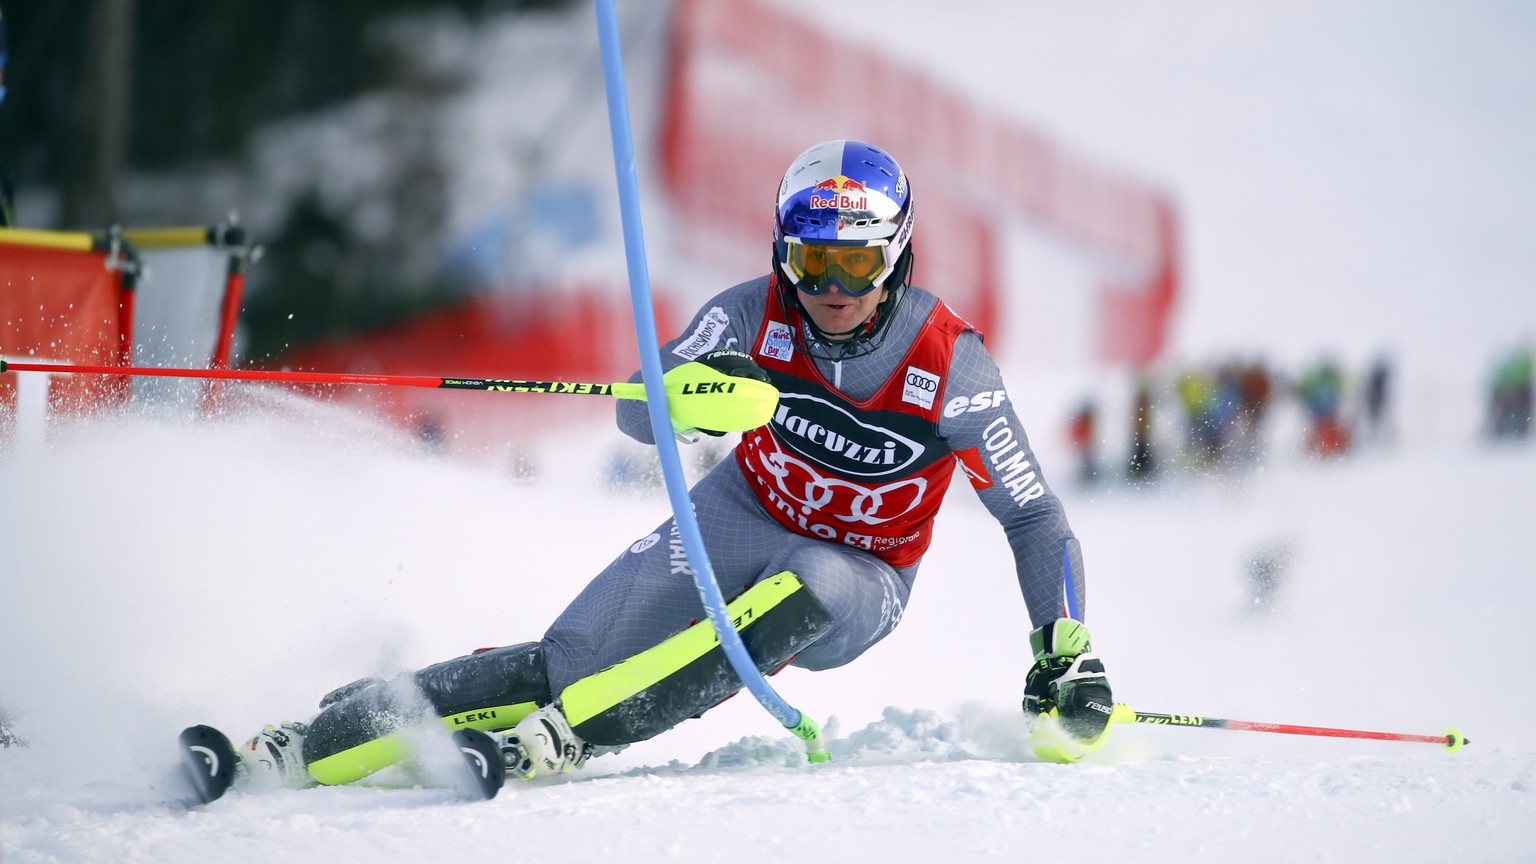 France&#039;s Alexis Pinturault competes during the second run of an alpine ski men&#039;s World Cup alpine combined, in Bormio, Italy, Friday, Dec. 29, 2017. (AP Photo/Marco Trovati)